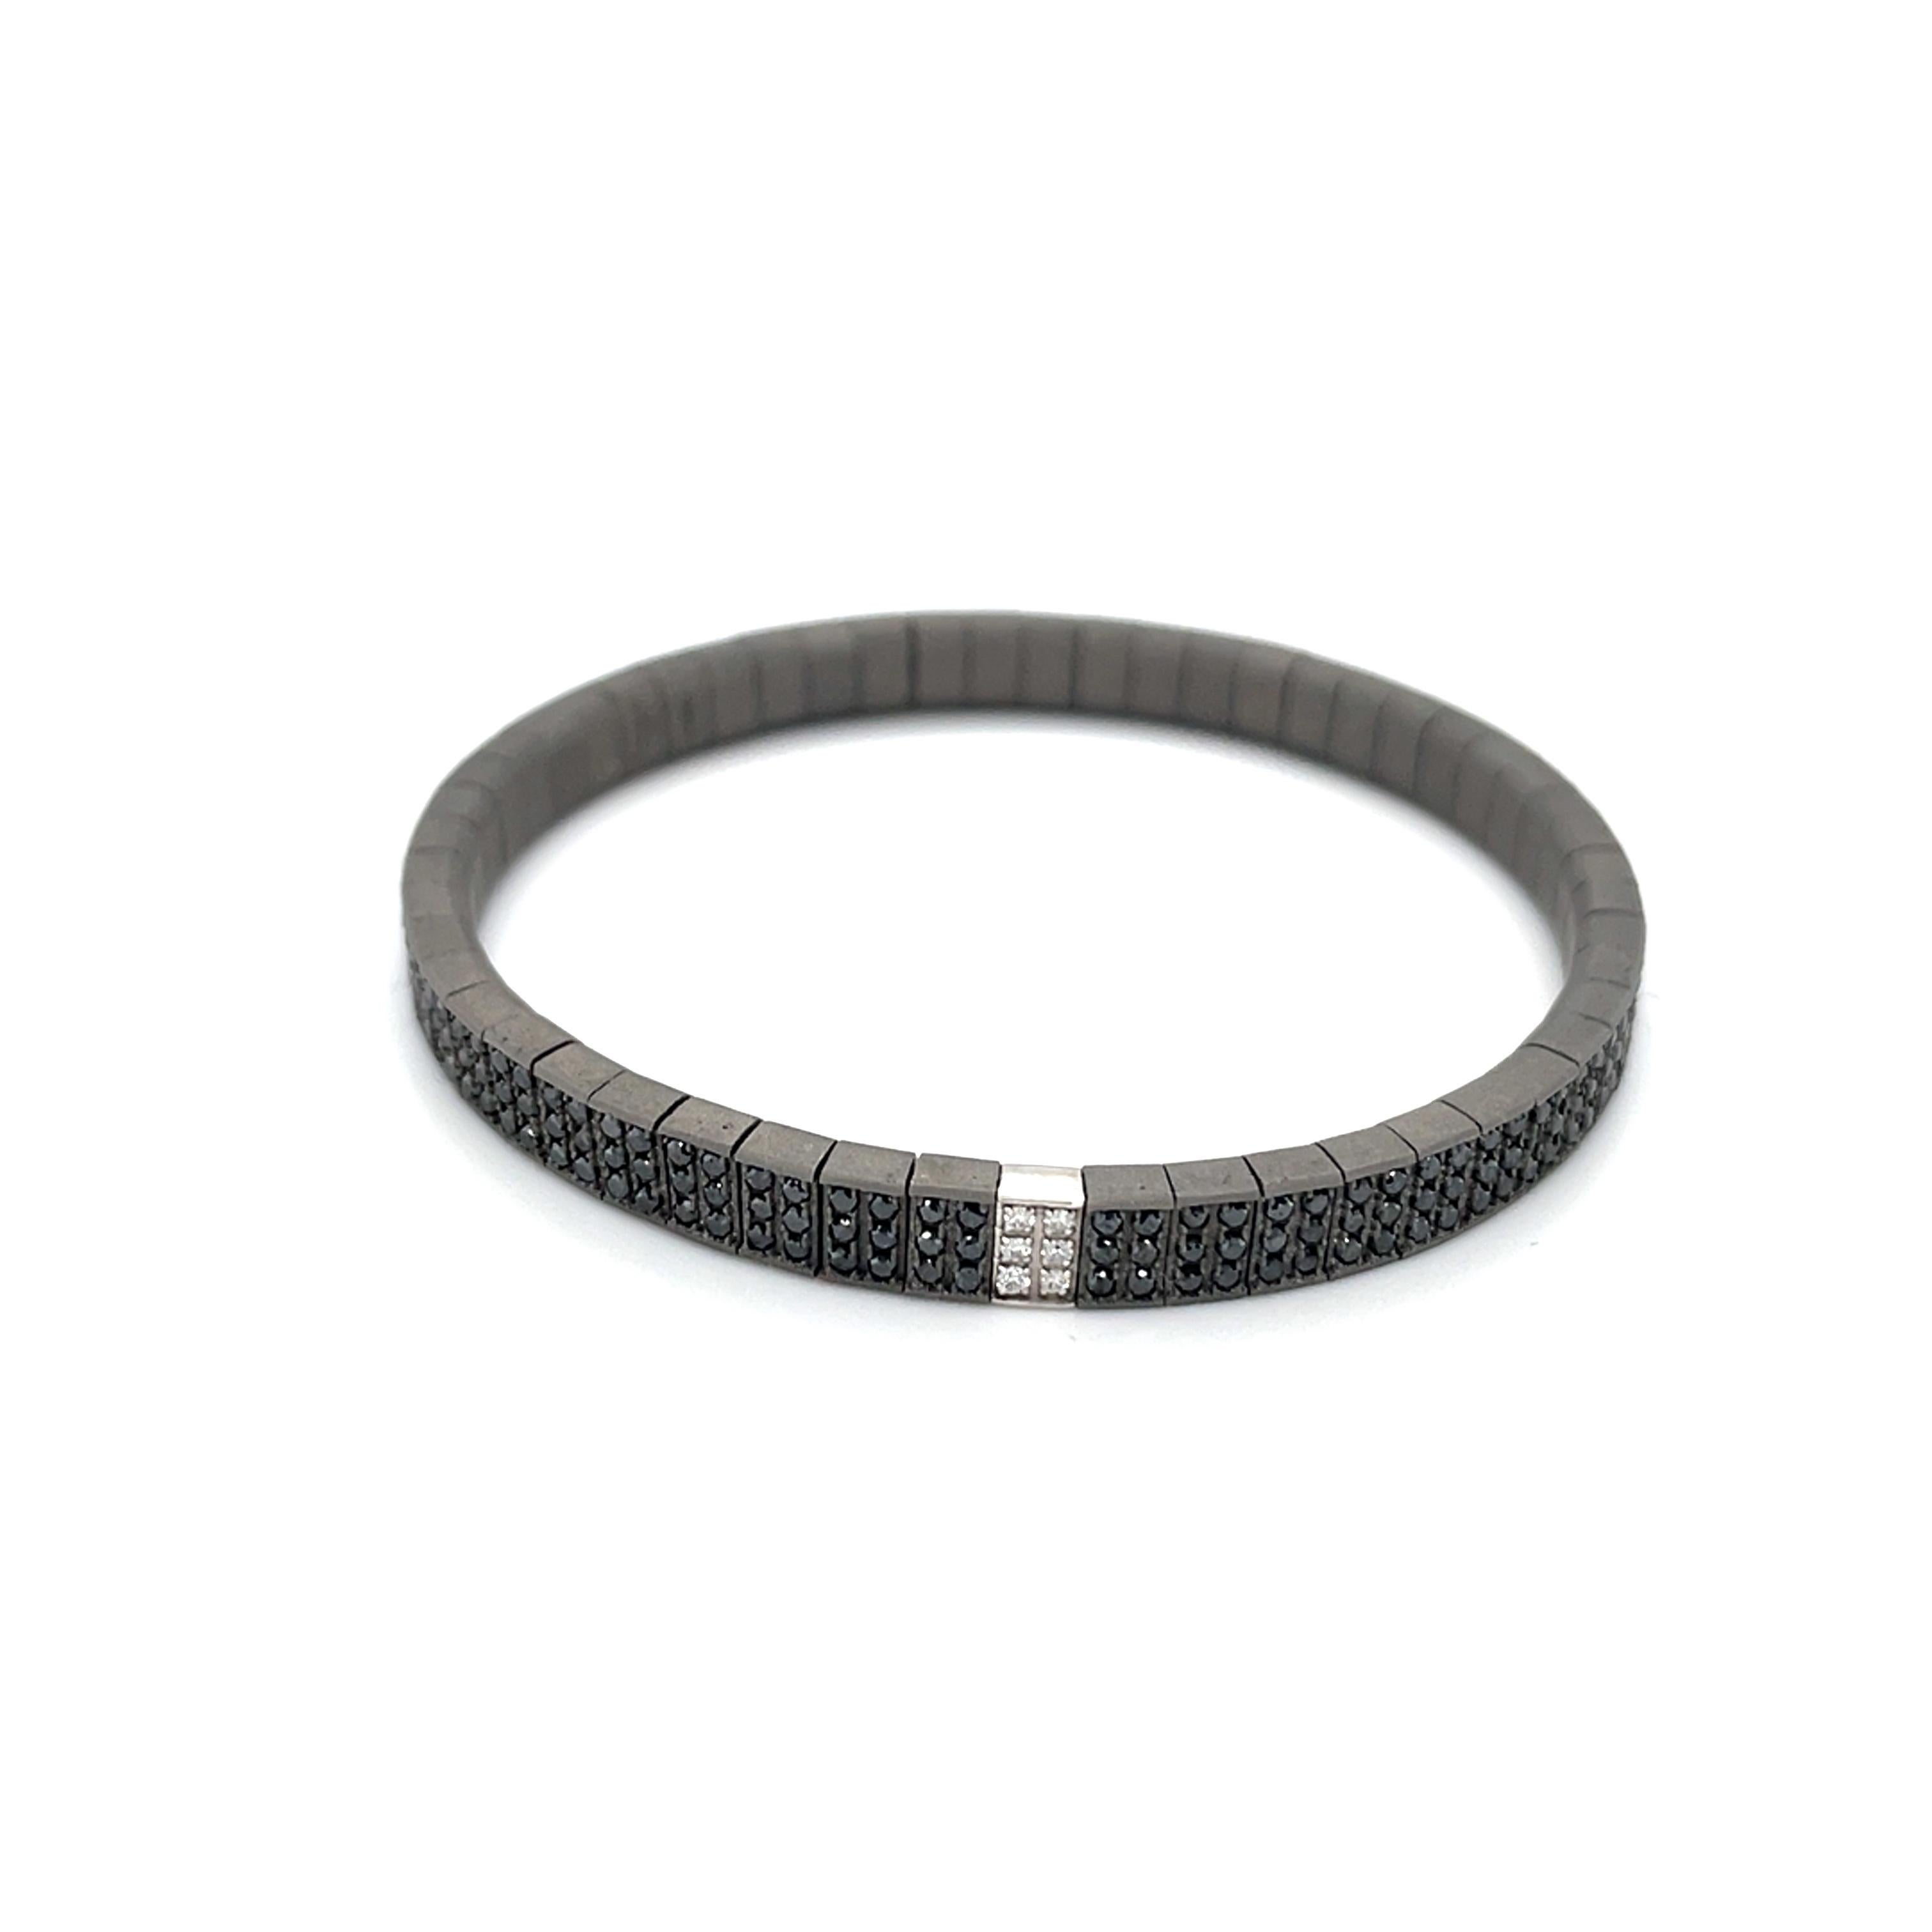 18K white gold bracelet is from our Men’s Collection. This masculine flexible bracelet is made of natural round black diamonds in total of 3.12 Carat placed along the bracelet with 6 natural round colorless diamonds in total of 0.06 Carat placed on